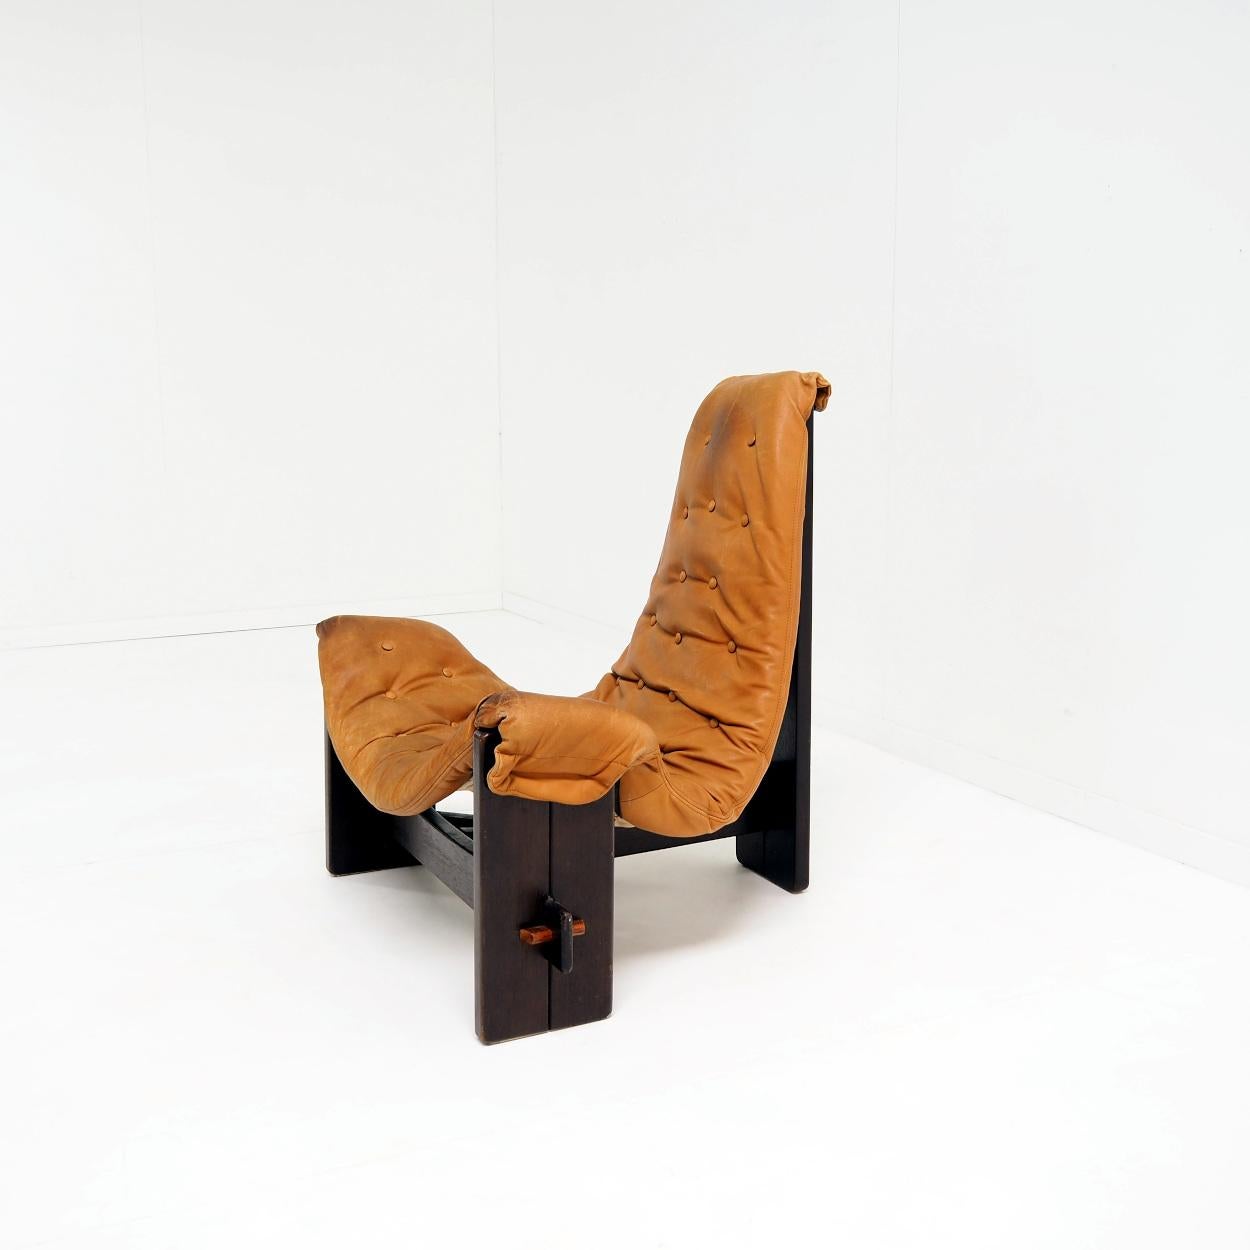 Brazilian 1960s Brutalist Sling Lounge Chair in Full Original Condition